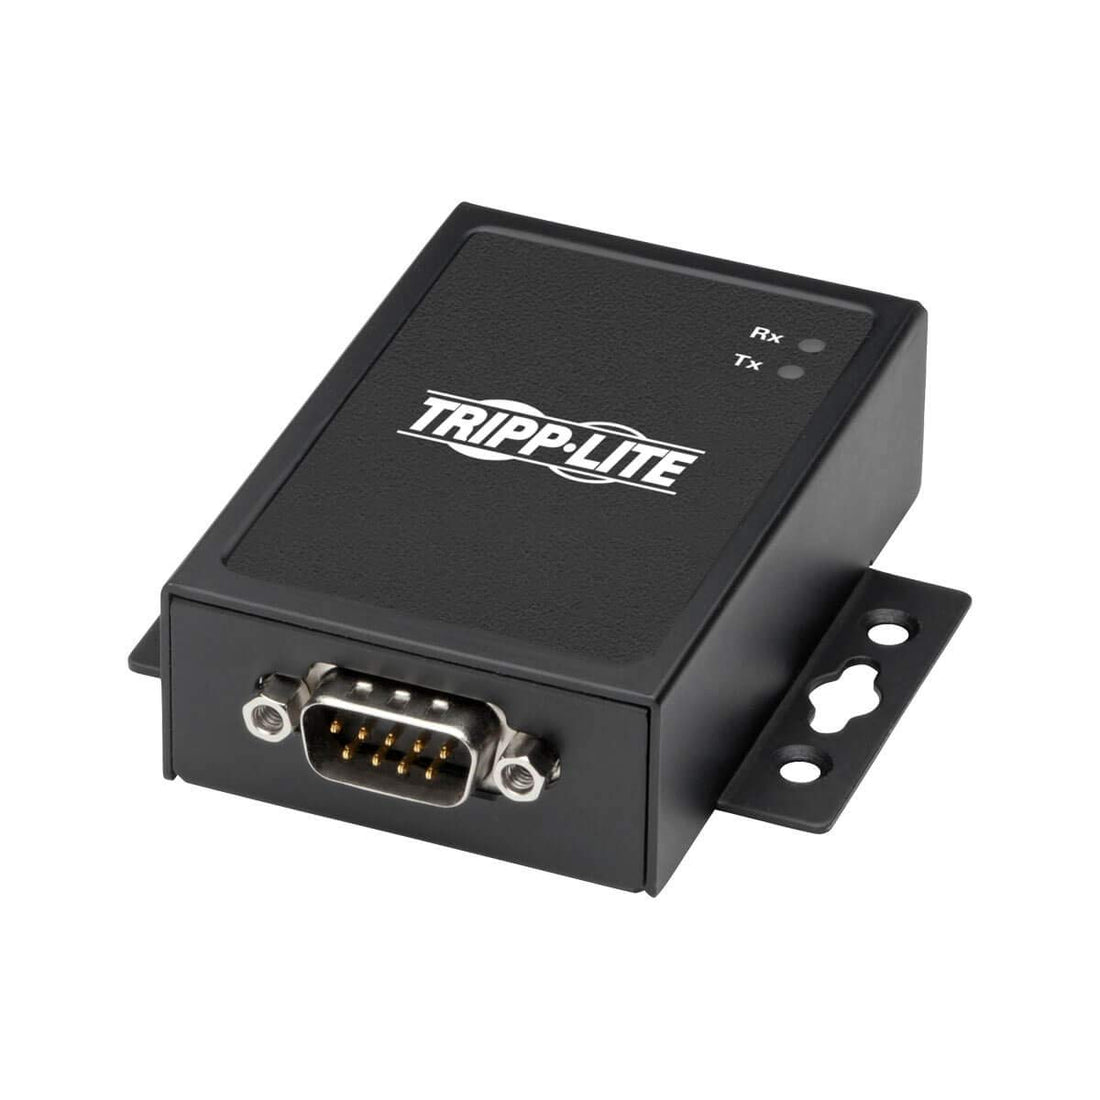 Tripp Lite 1-Port USB to Serial Adapter Converter, RS-422/RS-485 USB to DB9, Built-in FTDI Chipset (U208-001-IND)